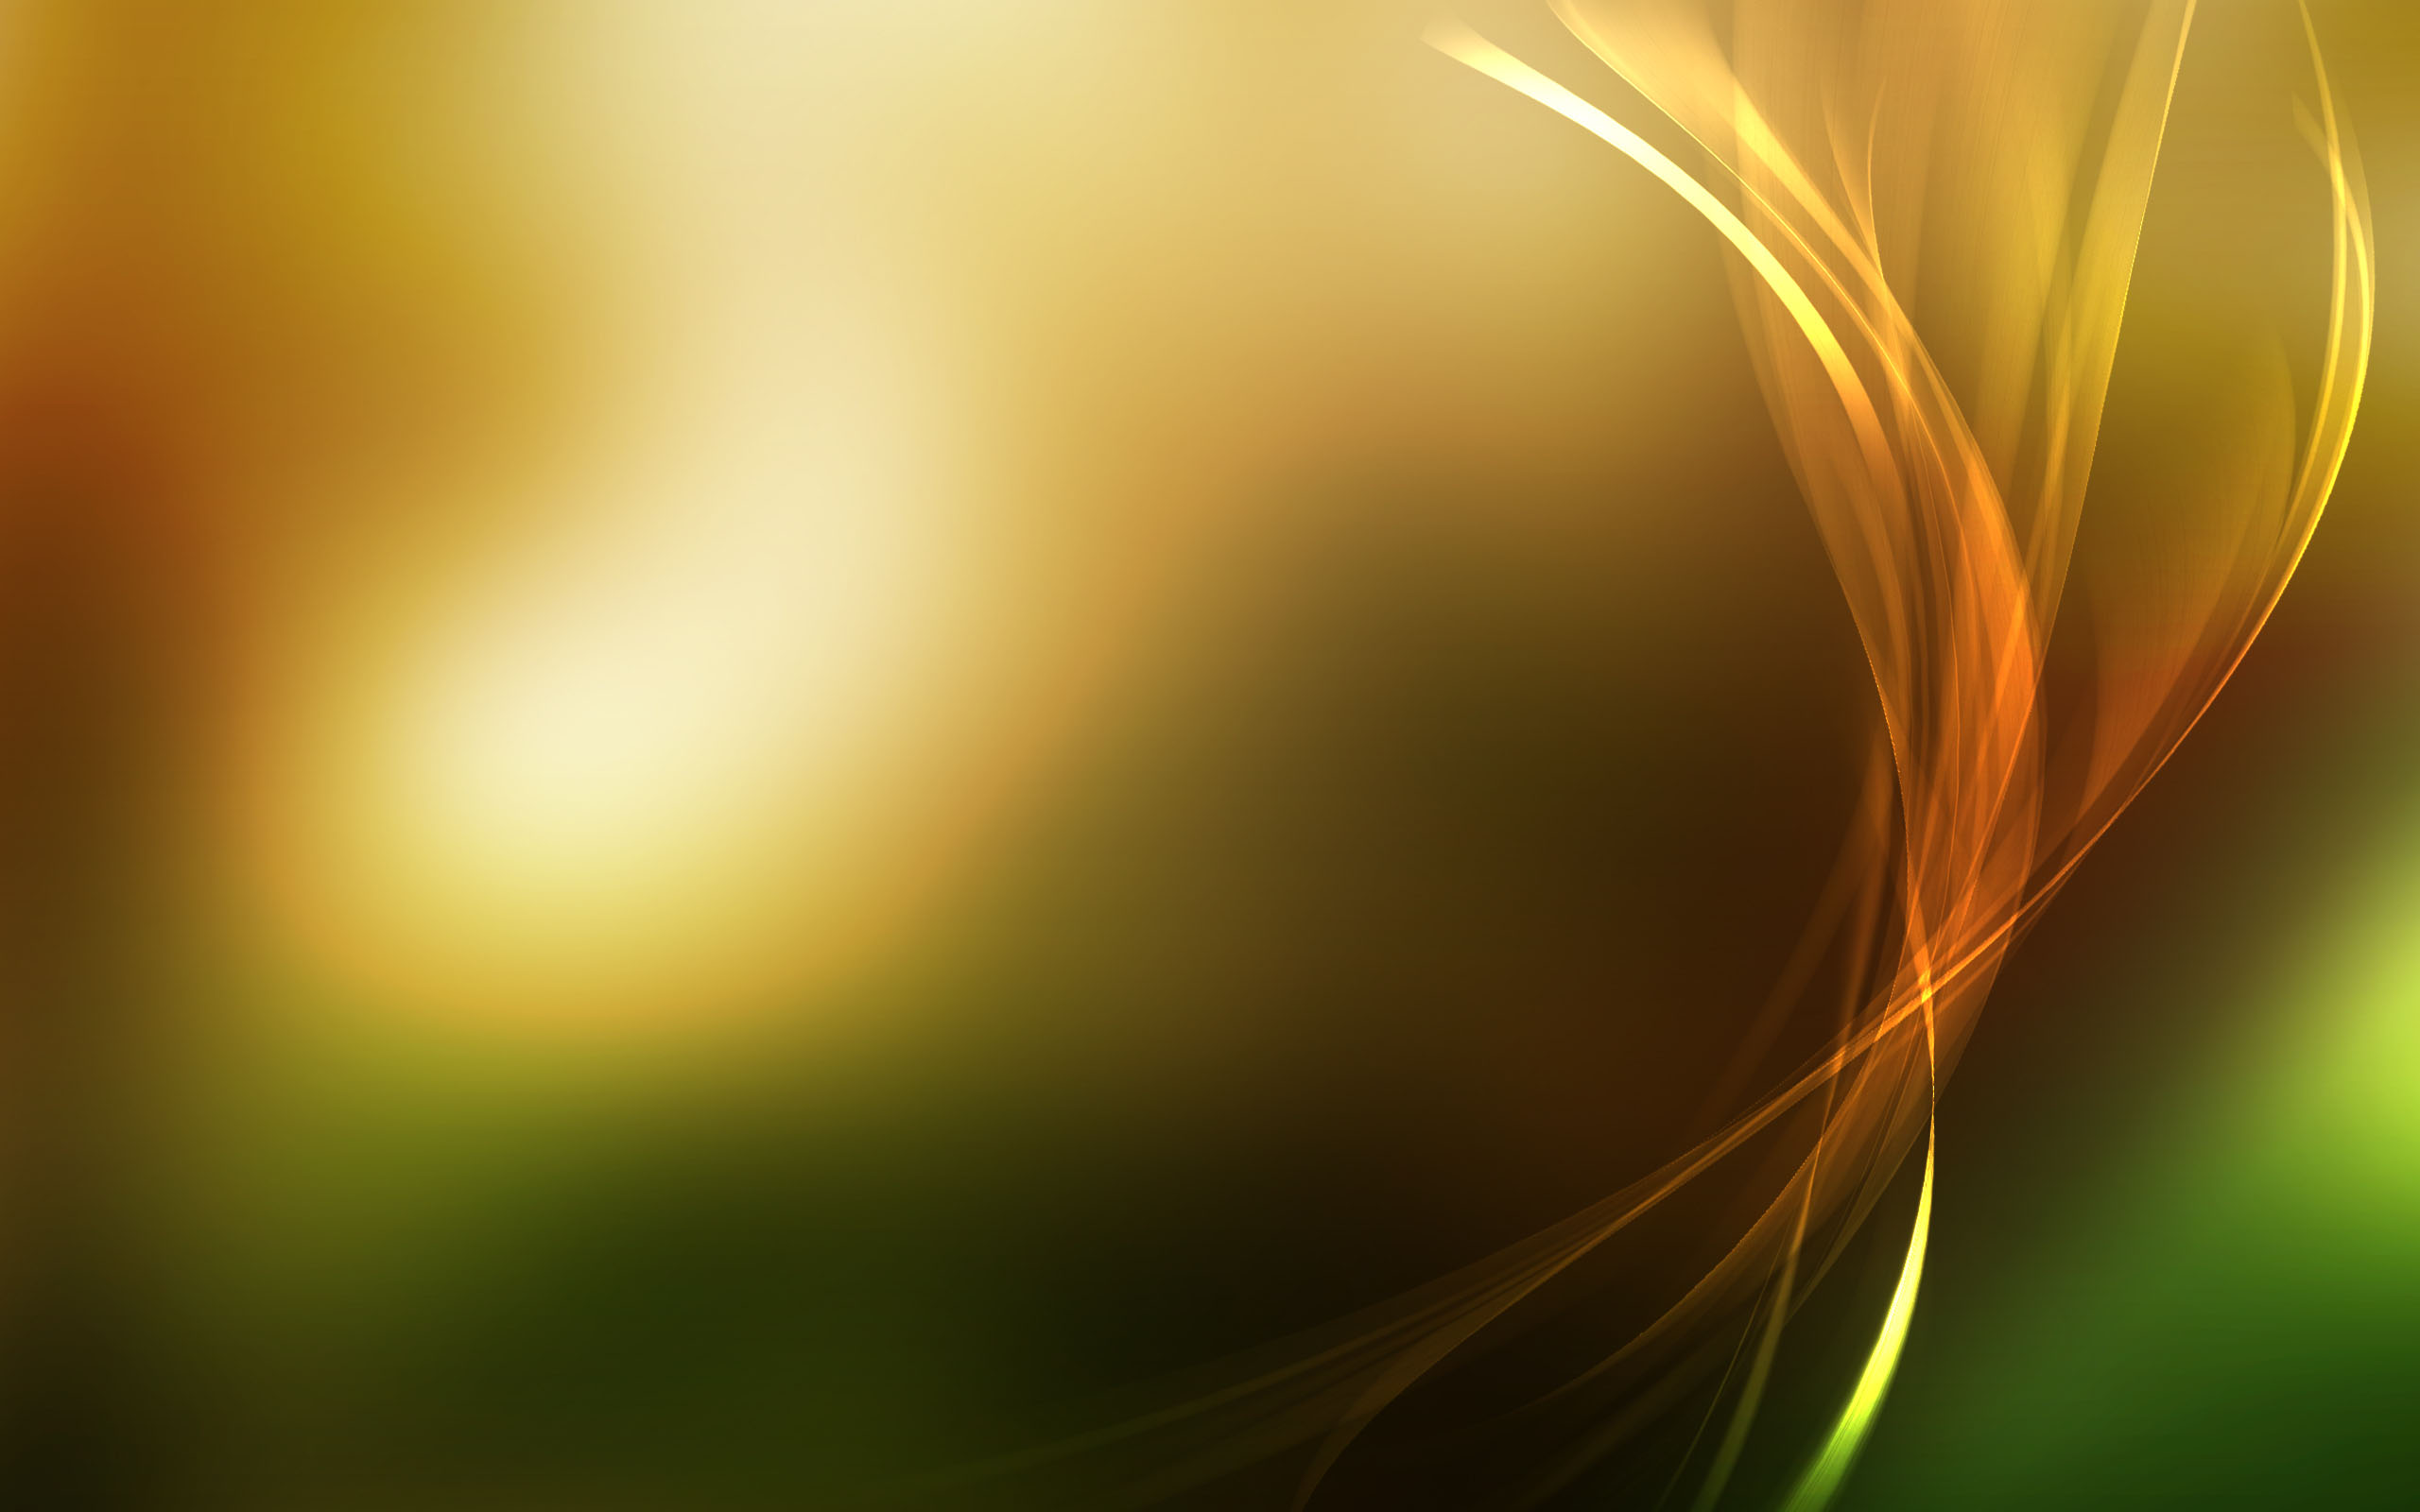 Calm Curves Abstract Wallpaper And Gold Abstract Background